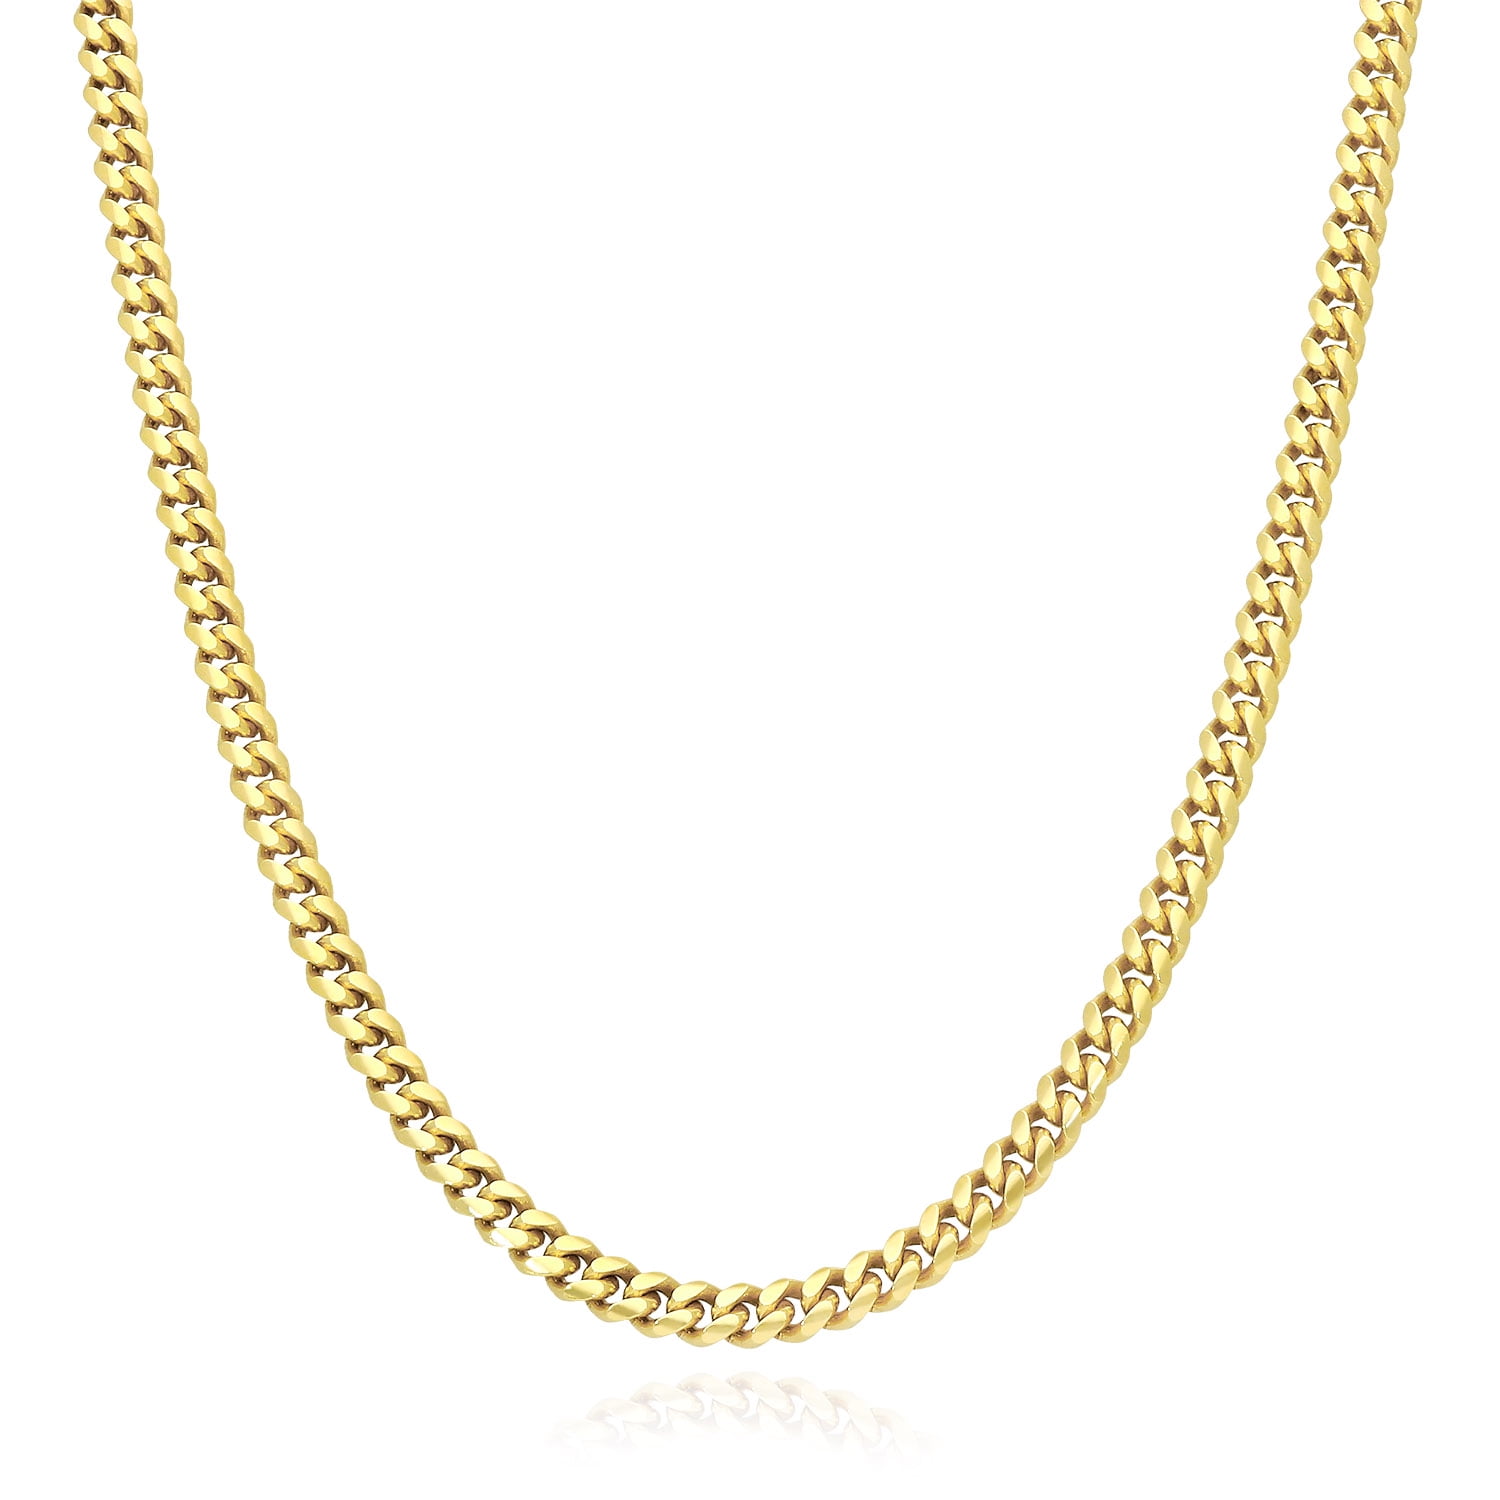 Innovative jewelry Fashion Stainless Steel 4/5/8mm Wide Gold Plated Mens Byzantine Chain Necklace,16-40 